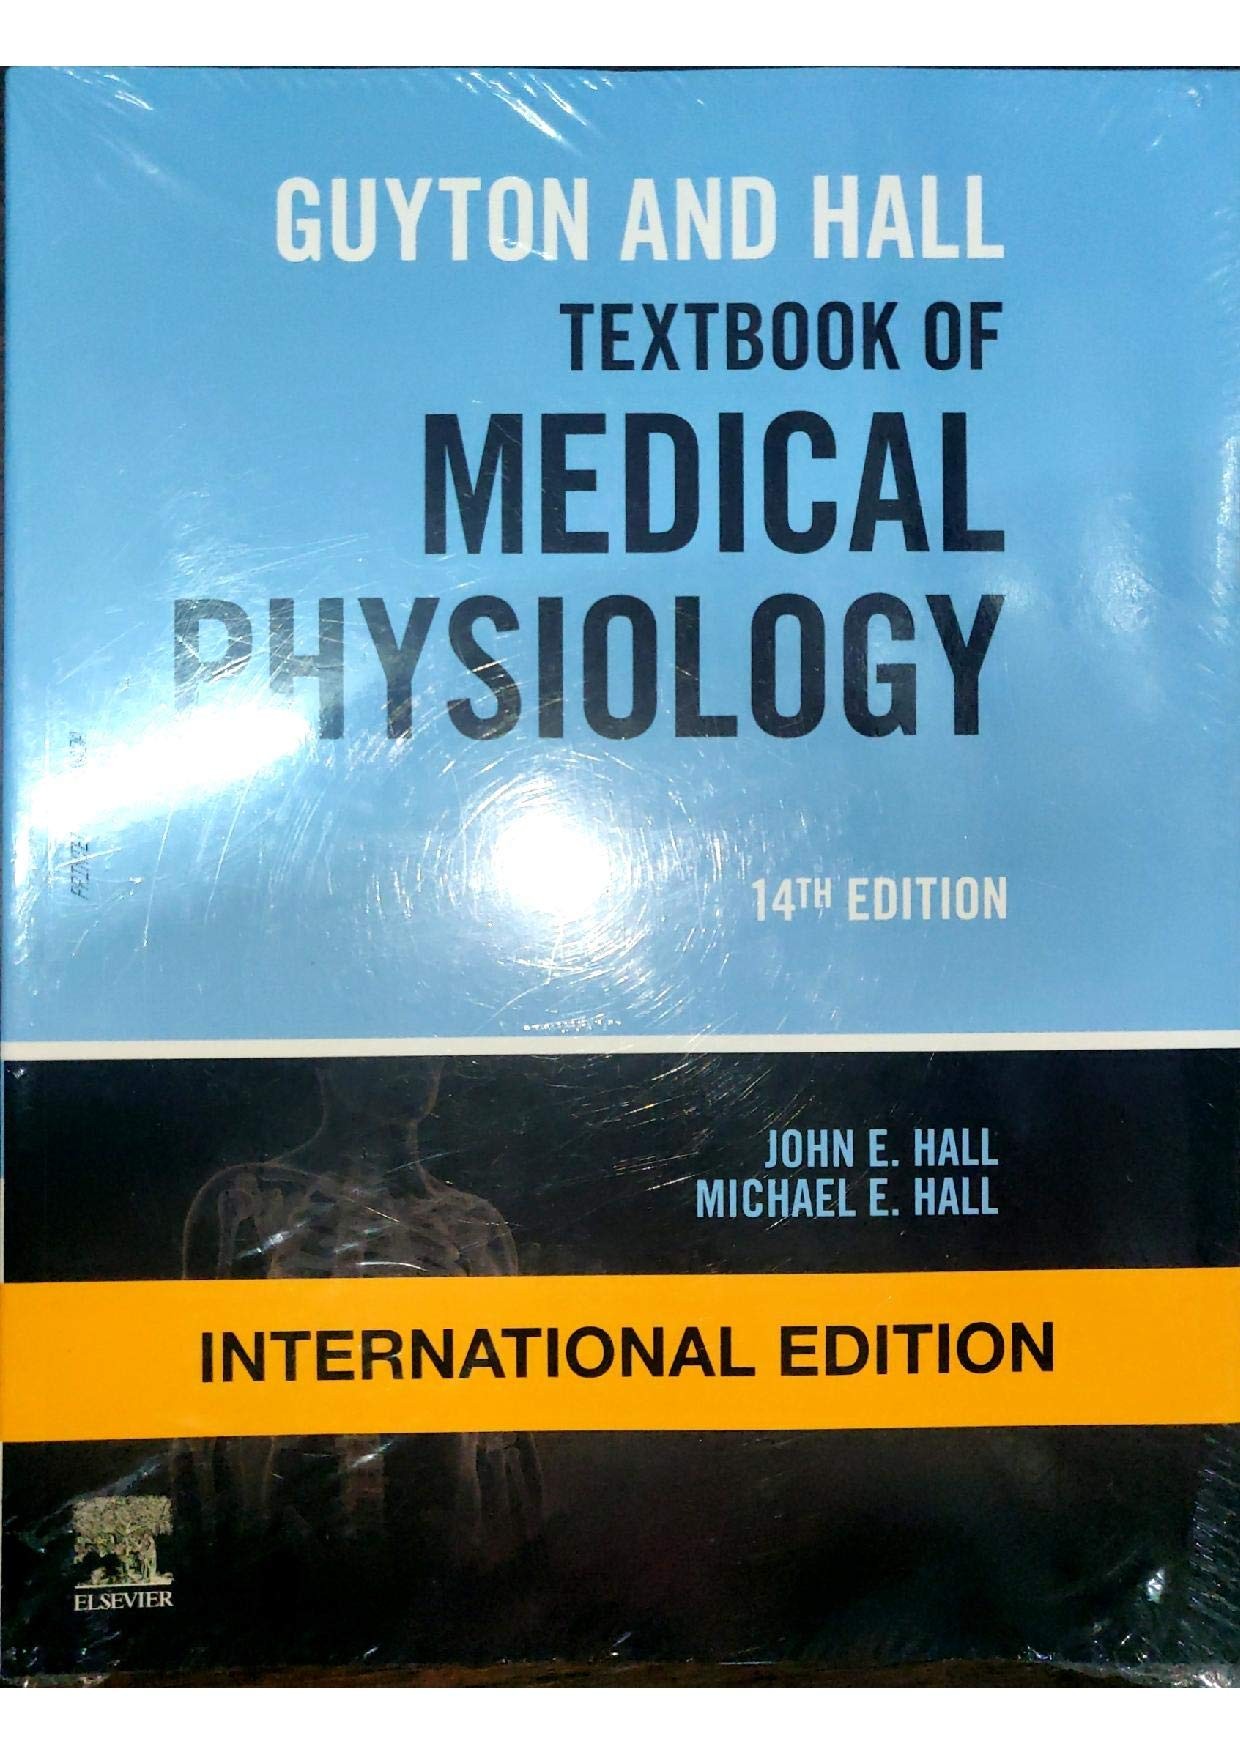 Guyton And Hall Textbook Of Medical Physiology,14 Ed. IE.- Elsevier Science, СОЕДИНЕННОЕ КОРОЛЕВСТВО, 2021